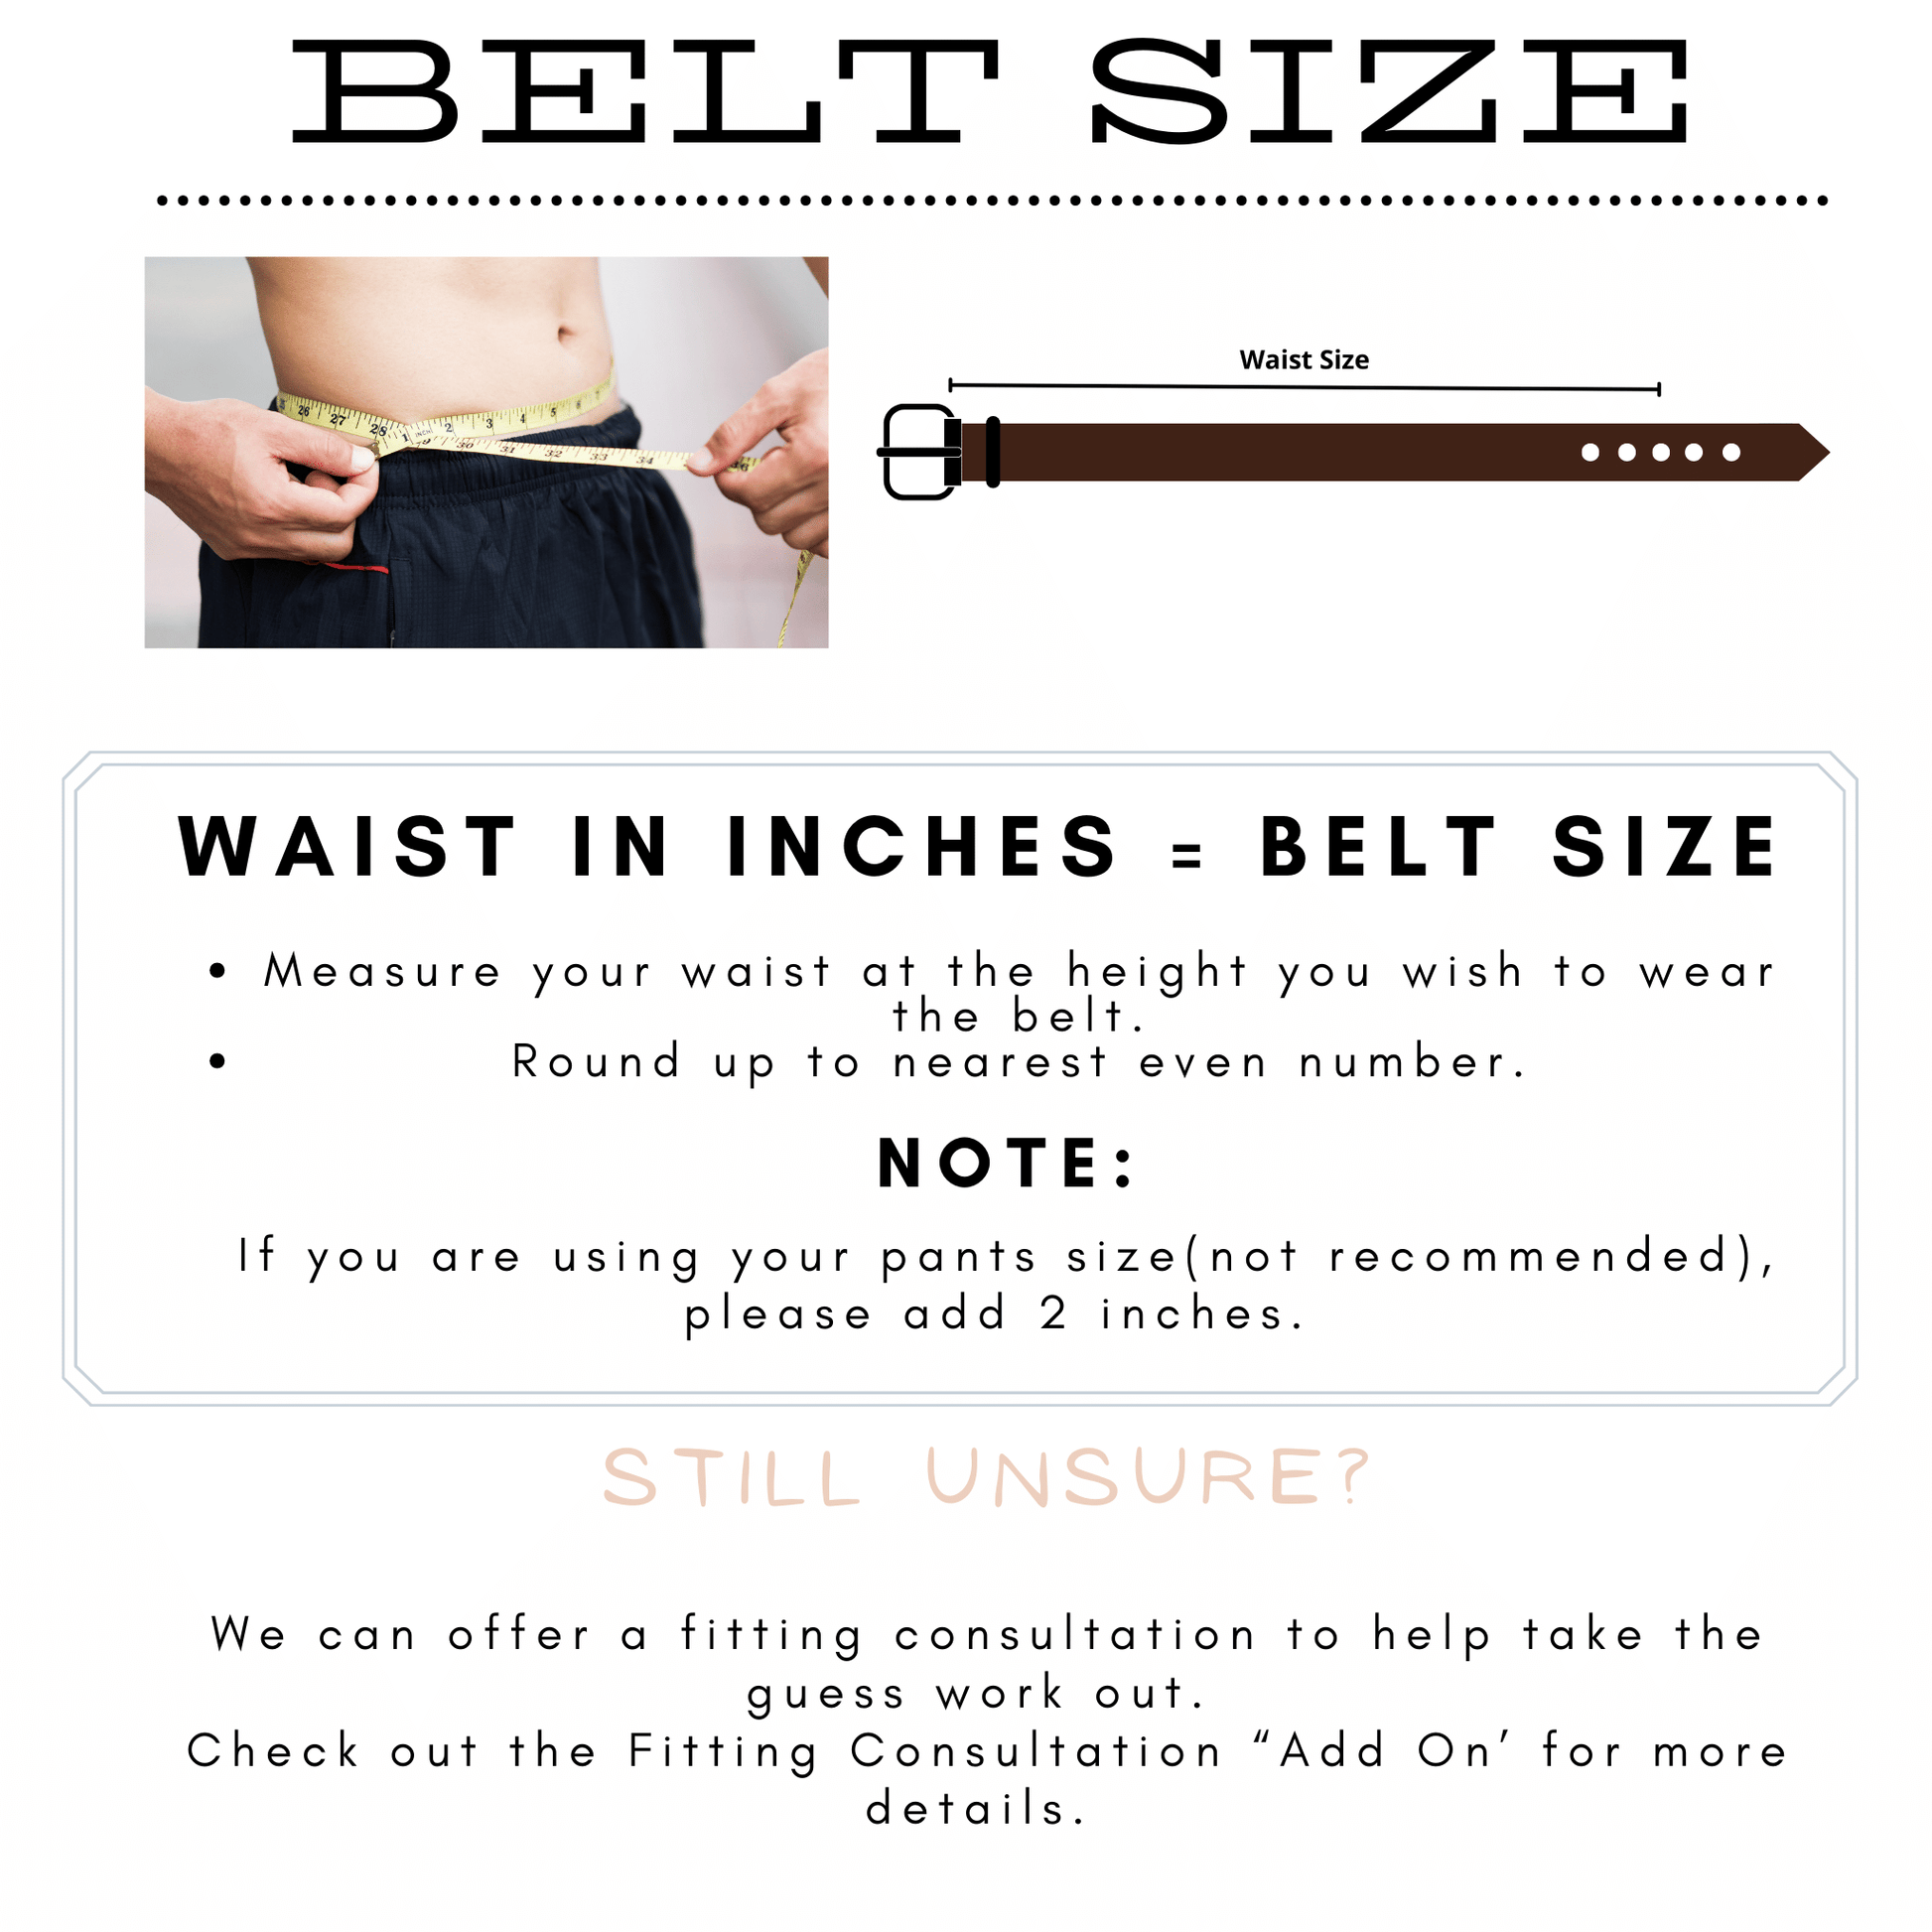 Belt Size Advice - Measure your waist or add 2 inches to your pants size